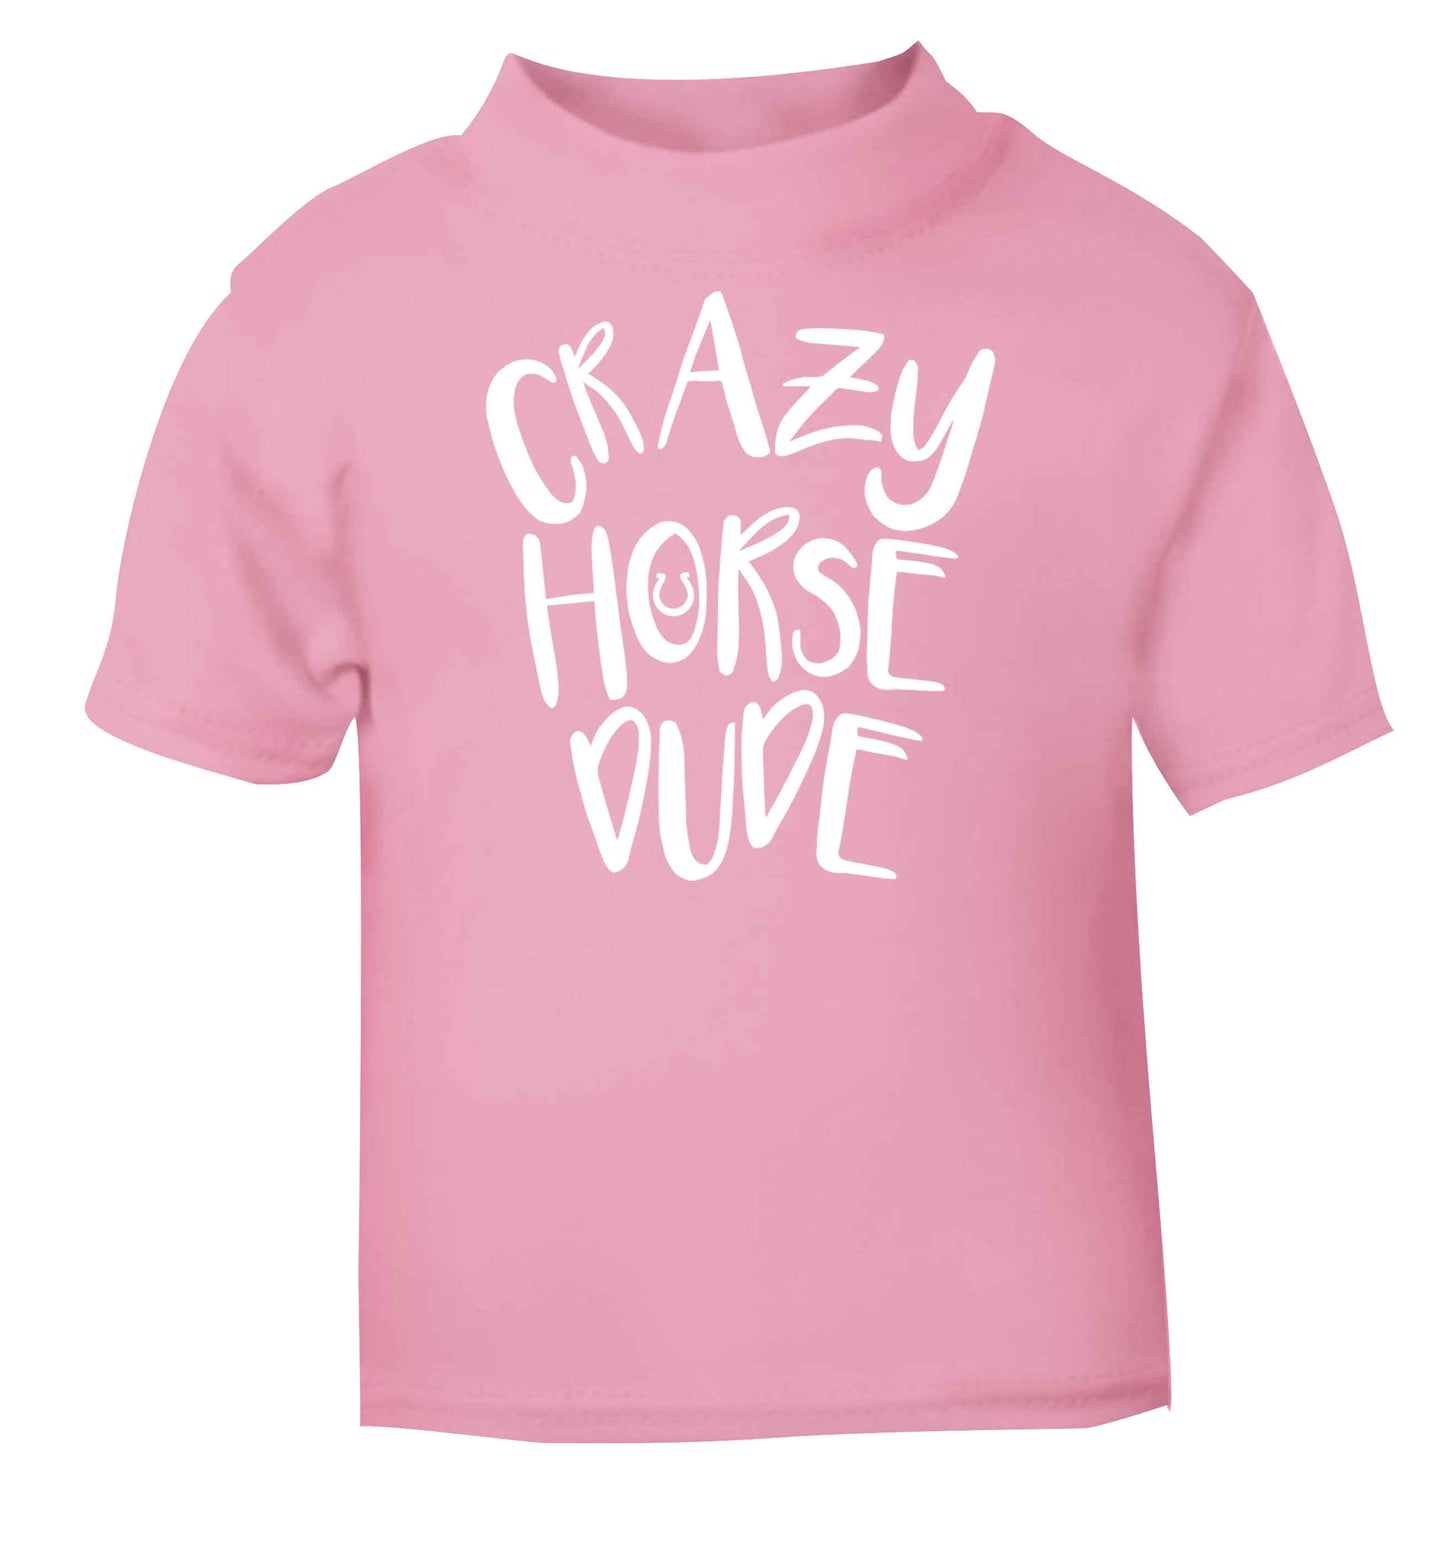 Crazy horse dude light pink baby toddler Tshirt 2 Years